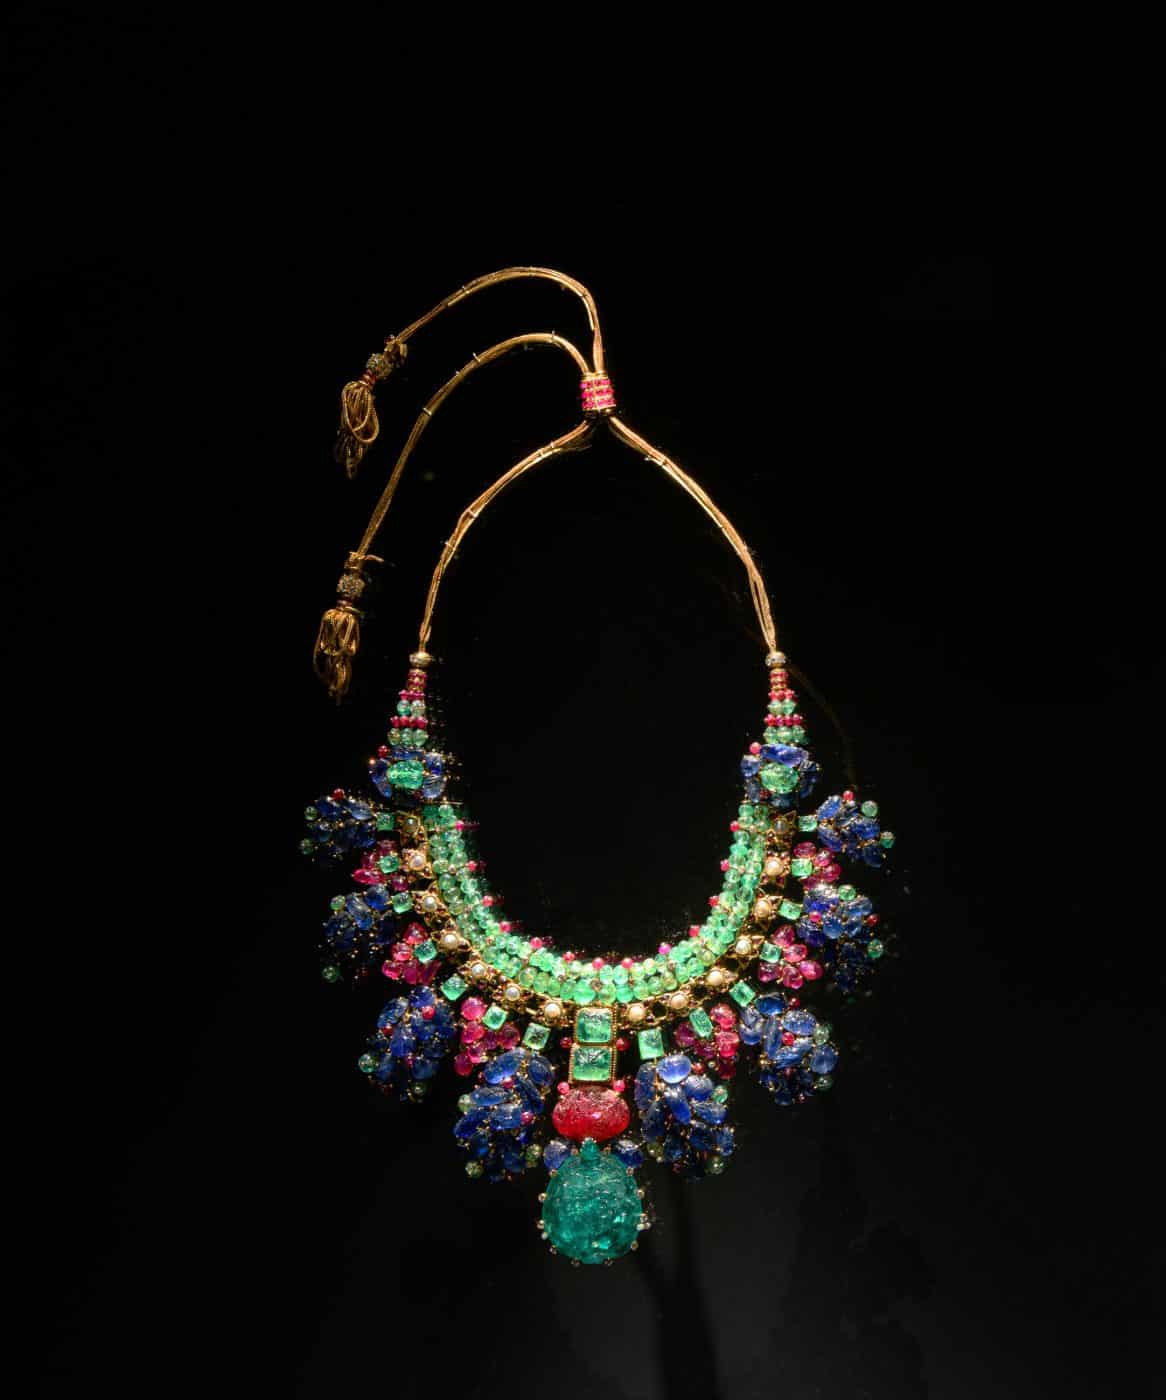 Cartier Paris necklace composed of gold, platinum, diamonds, emeralds, rubies, sapphires, pearls and enamel.